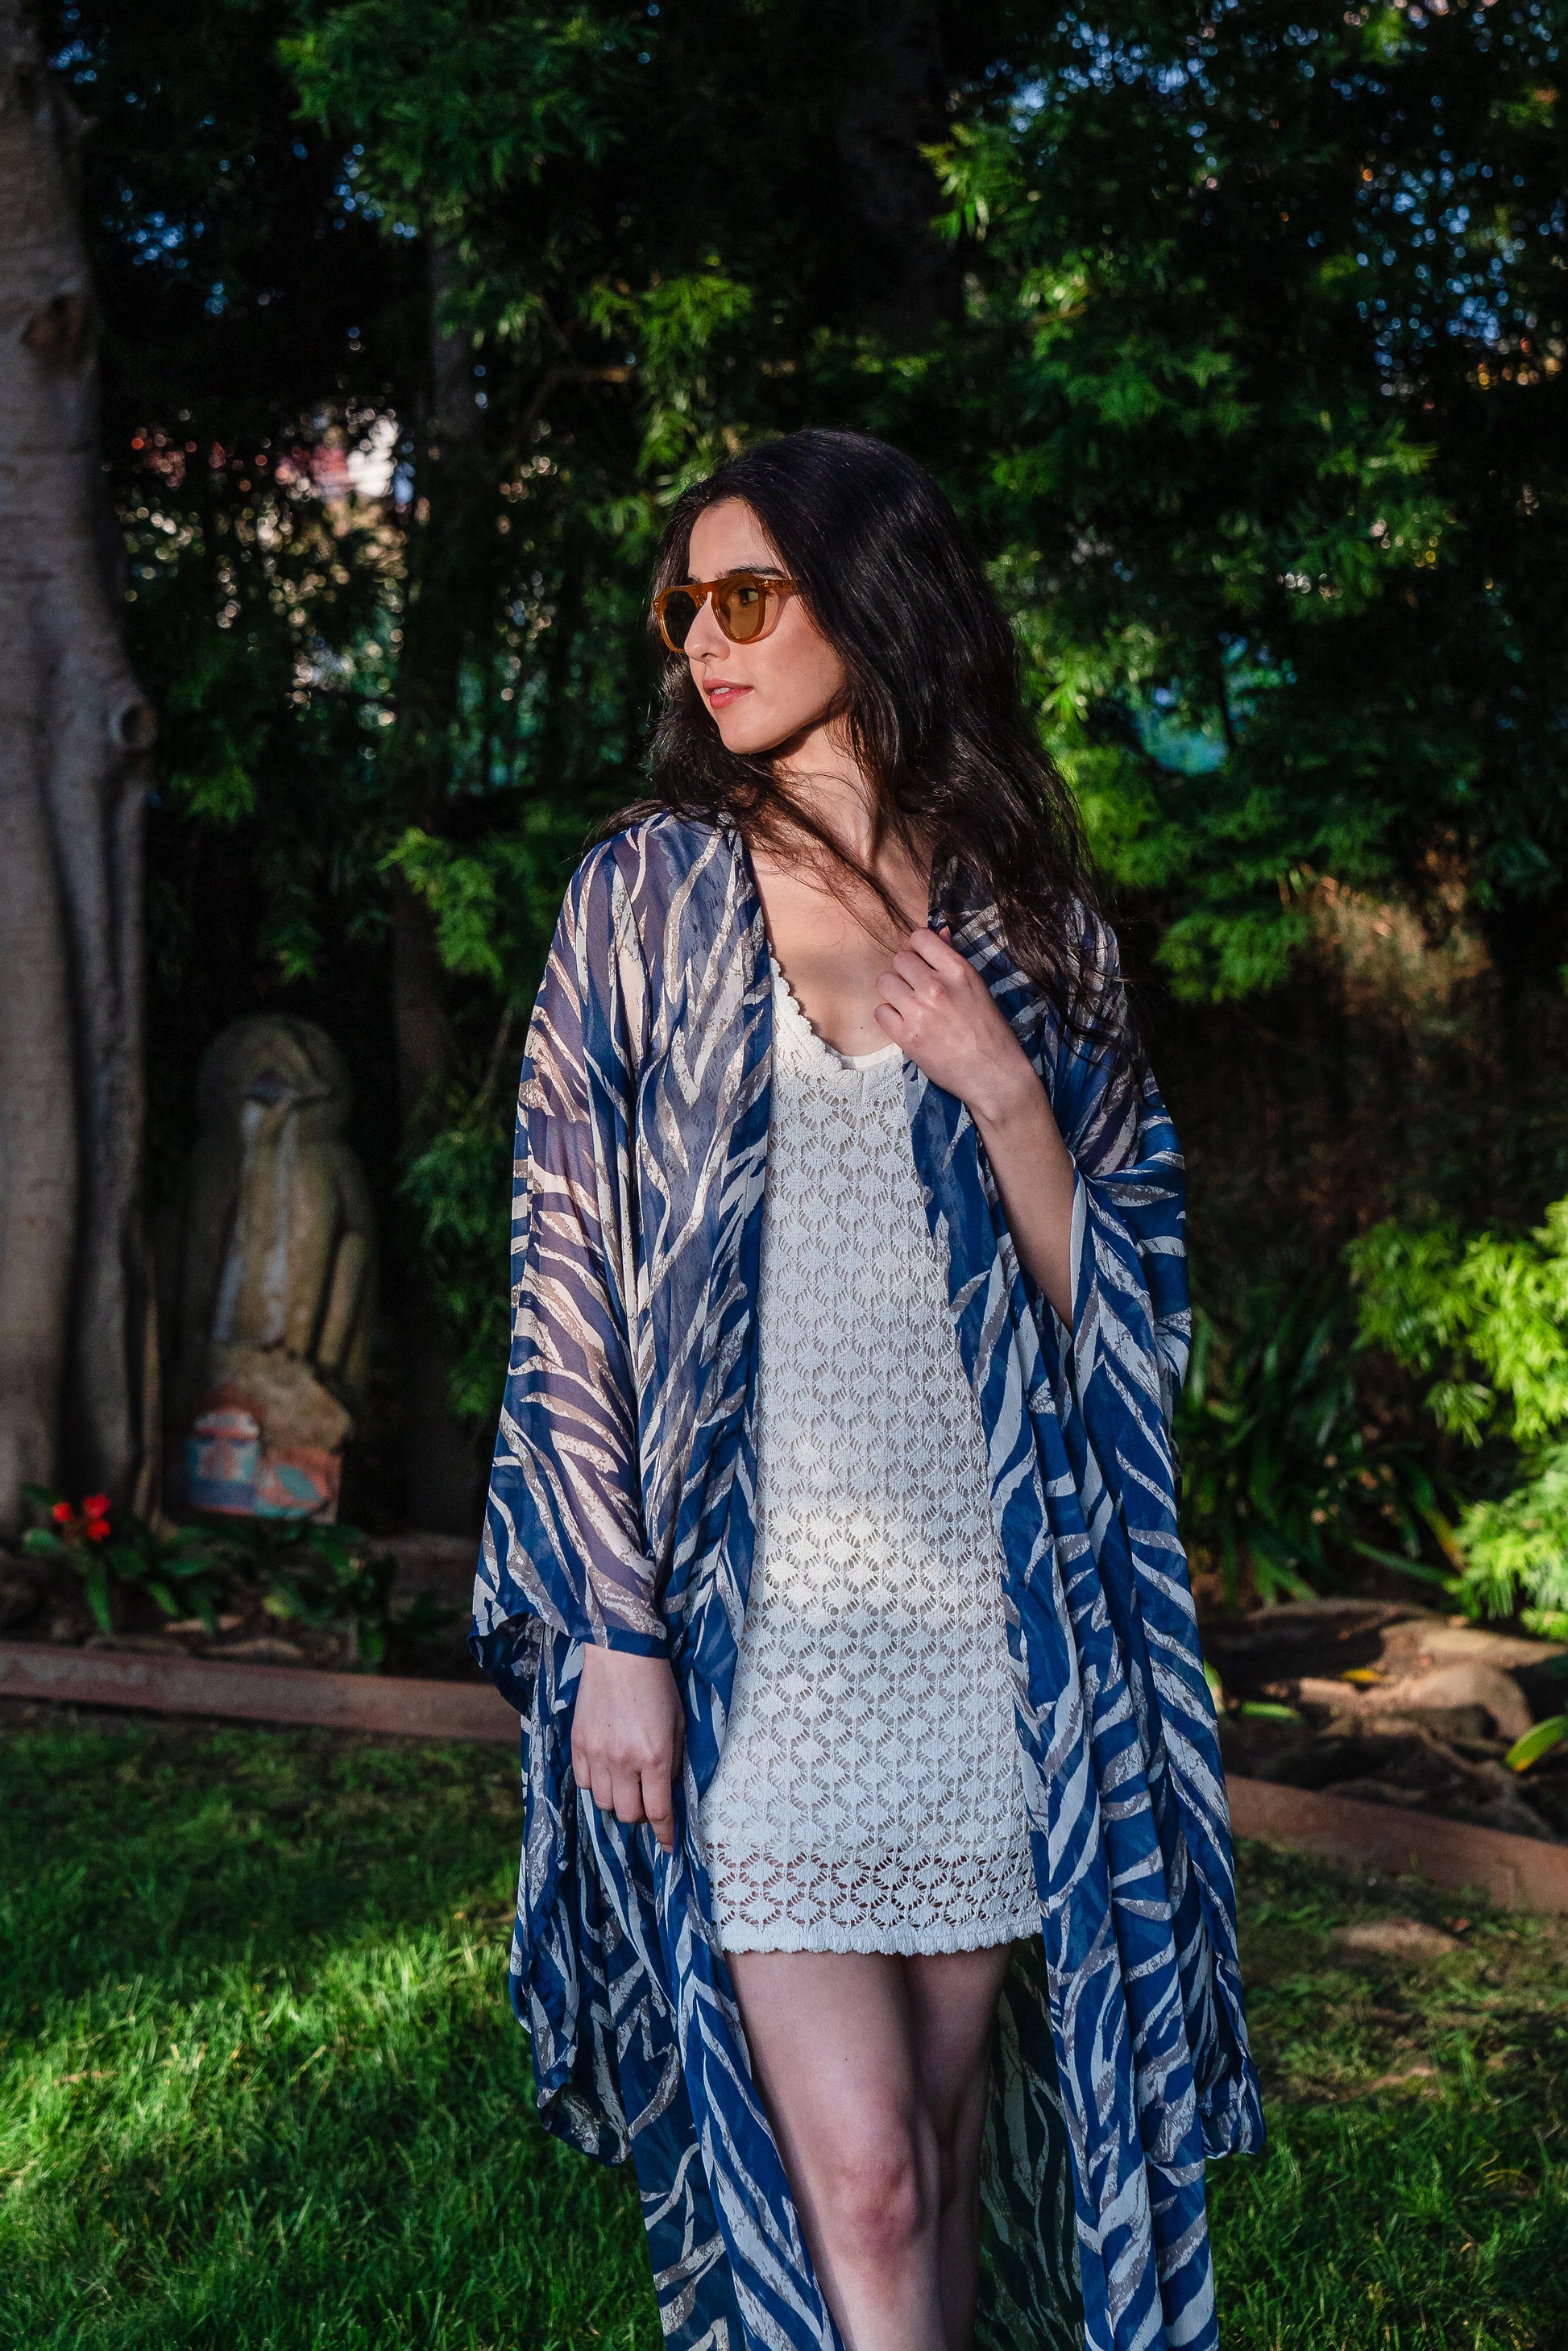  Blue zebra print kimono with belt. Can be worn open as a robe or wrap dress. Long flowy sleeves with ankle hem. Made from semi sheer rayon chiffon fabric.